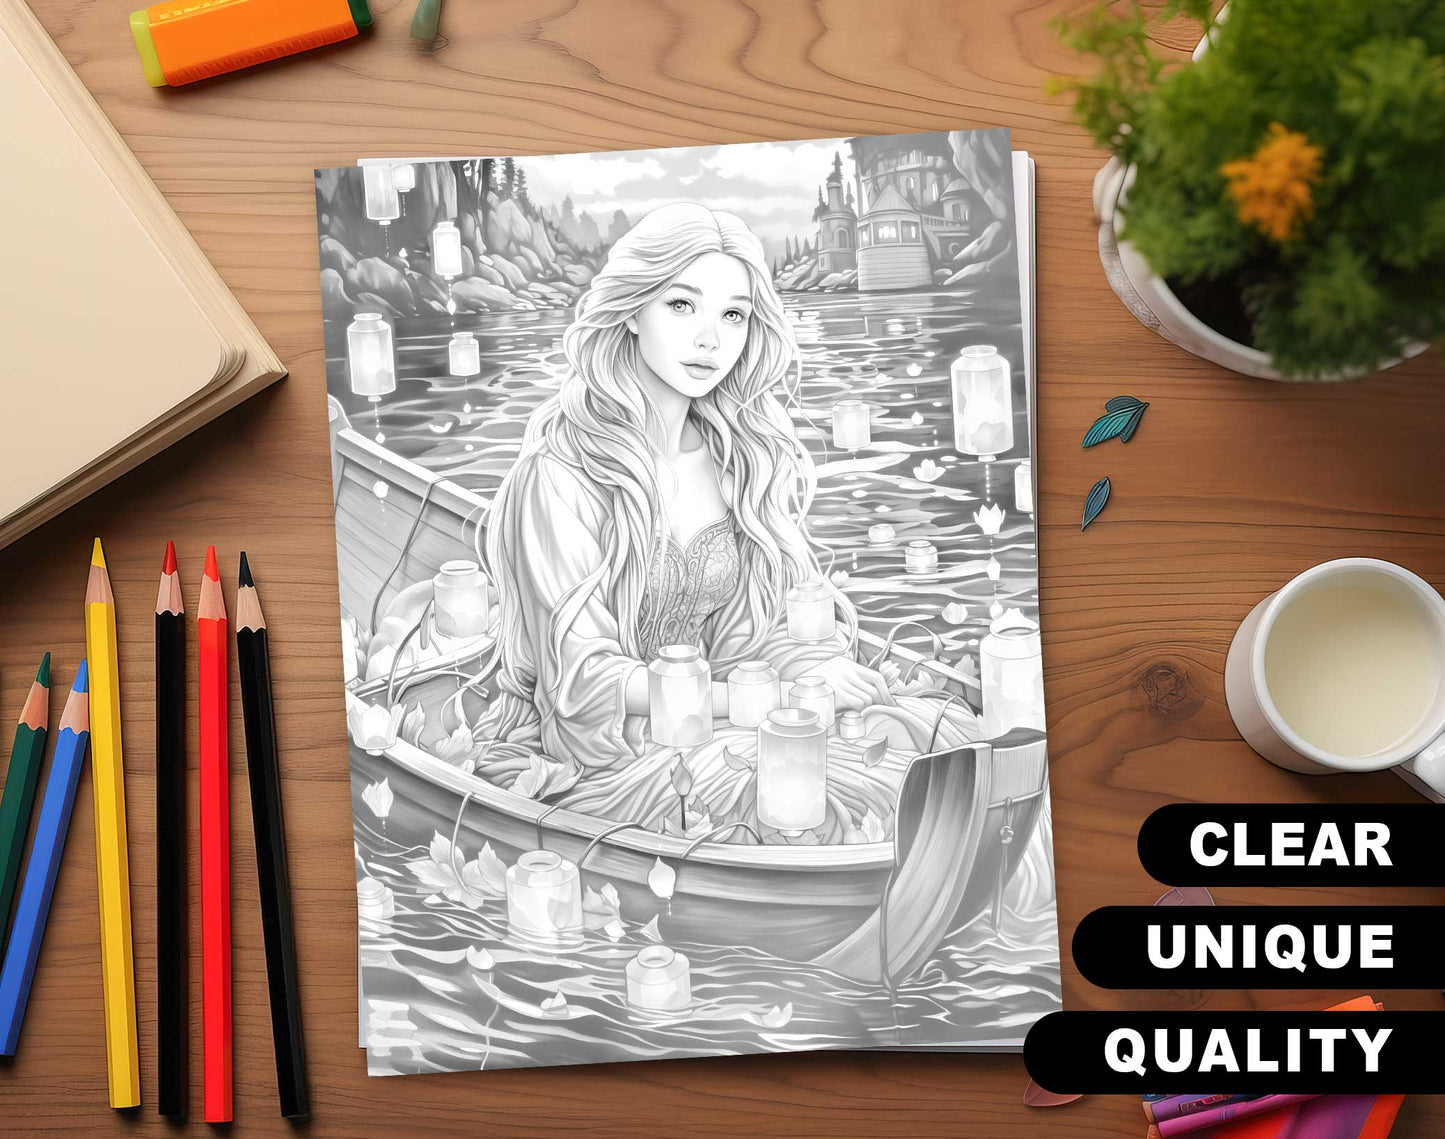 50 Fairy Tale Princess Grayscale Coloring Pages - Instant Download - Printable PDF Dark/Light